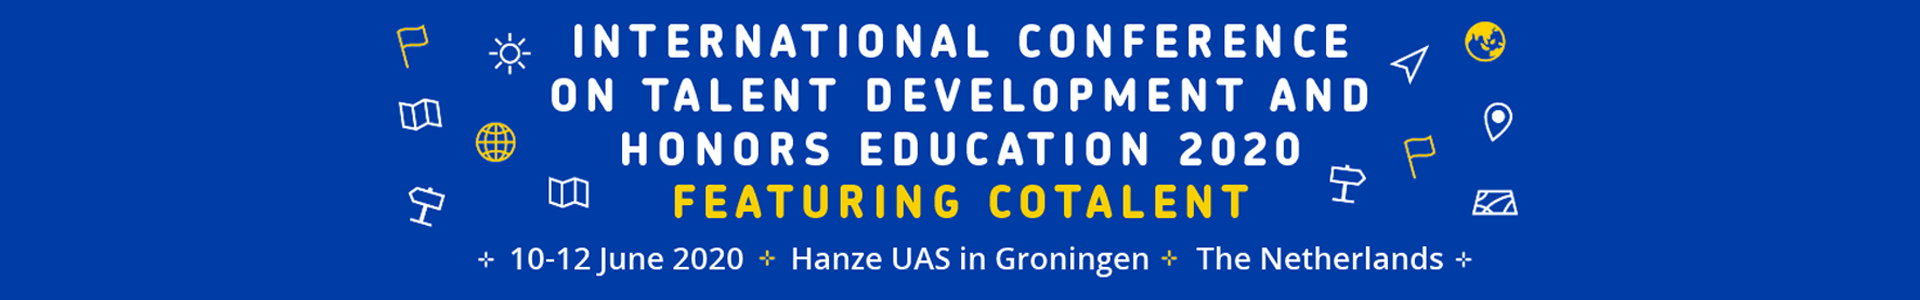 International Conference on Talent Development and Honors Education